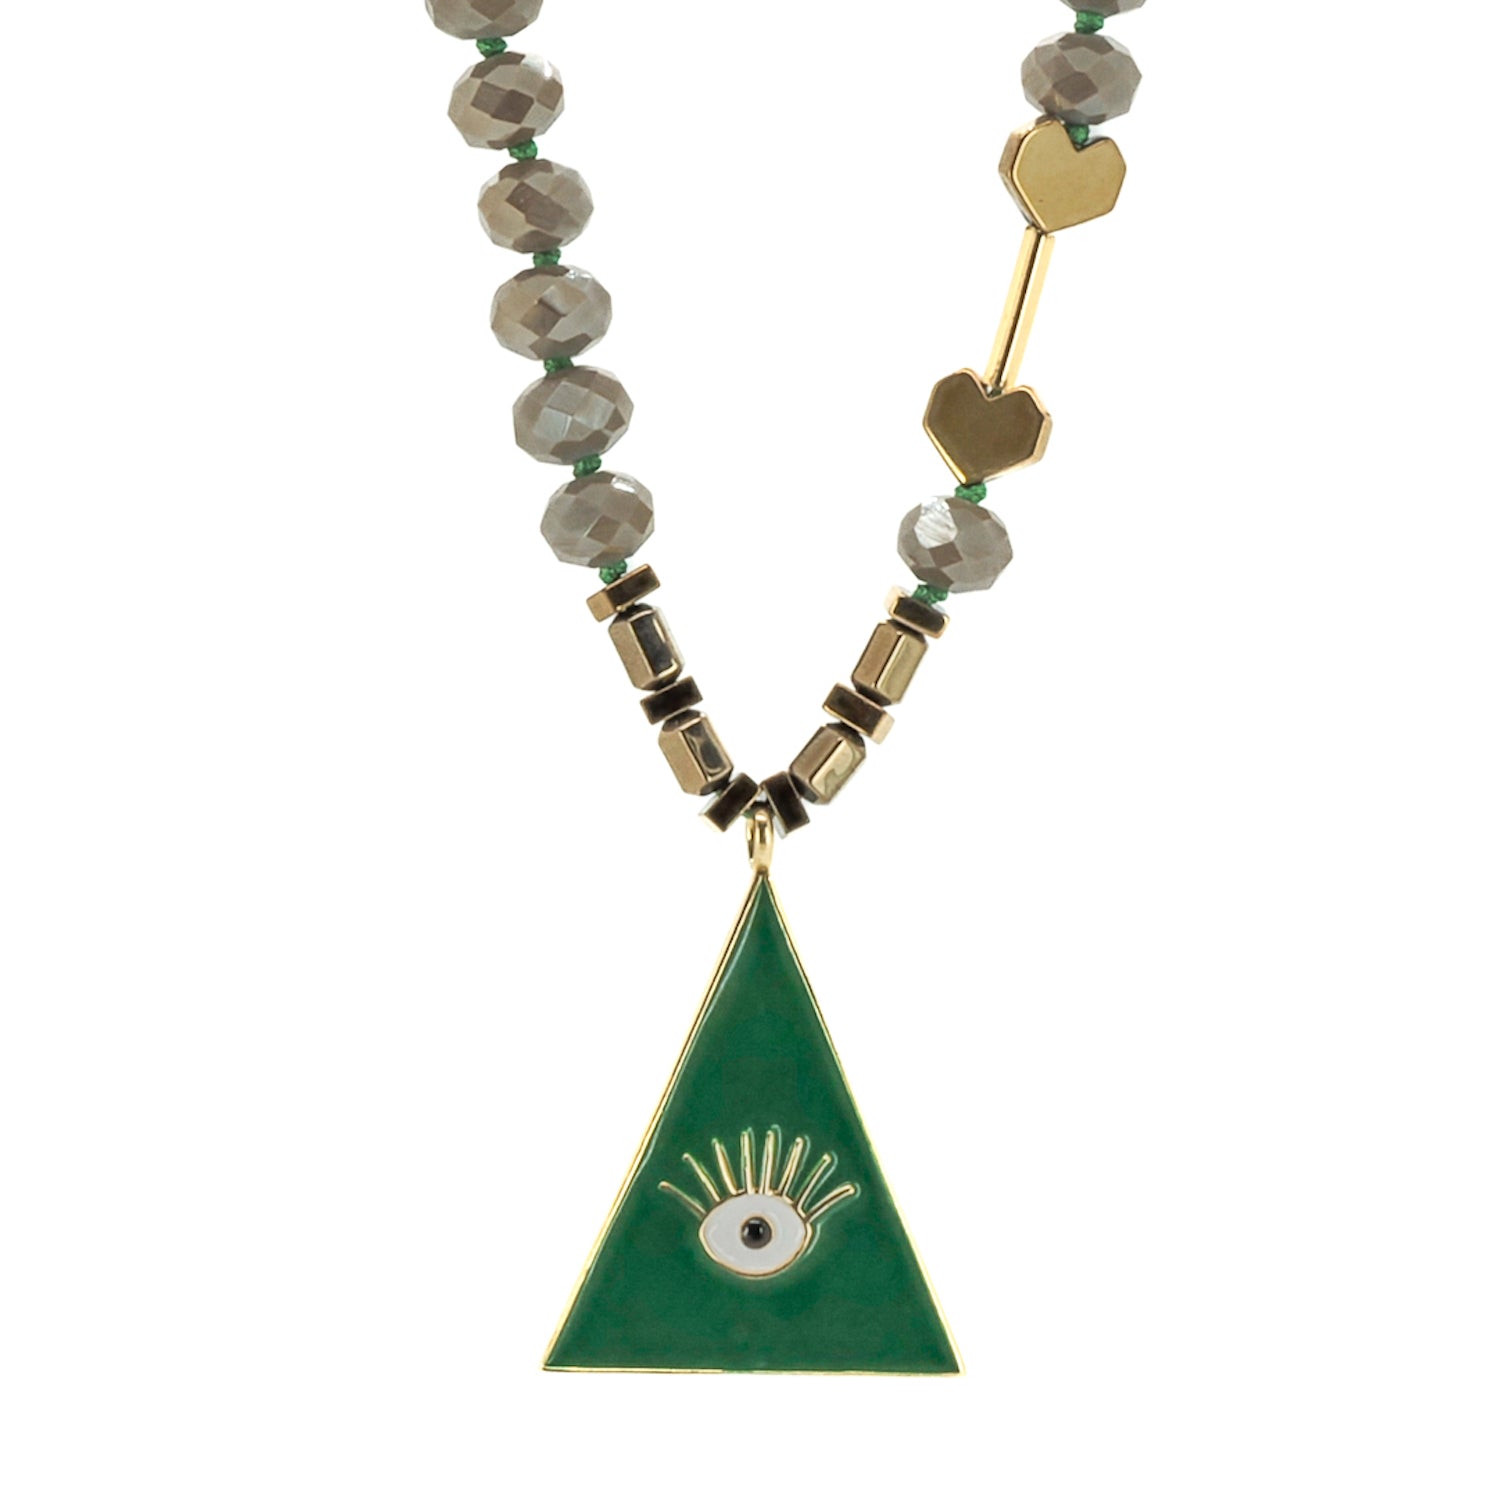 A striking Green Evil Eye Unique Necklace featuring green and beige crystal beads, gold hematite stone heart shape beads, and Alhambra flower beads. 